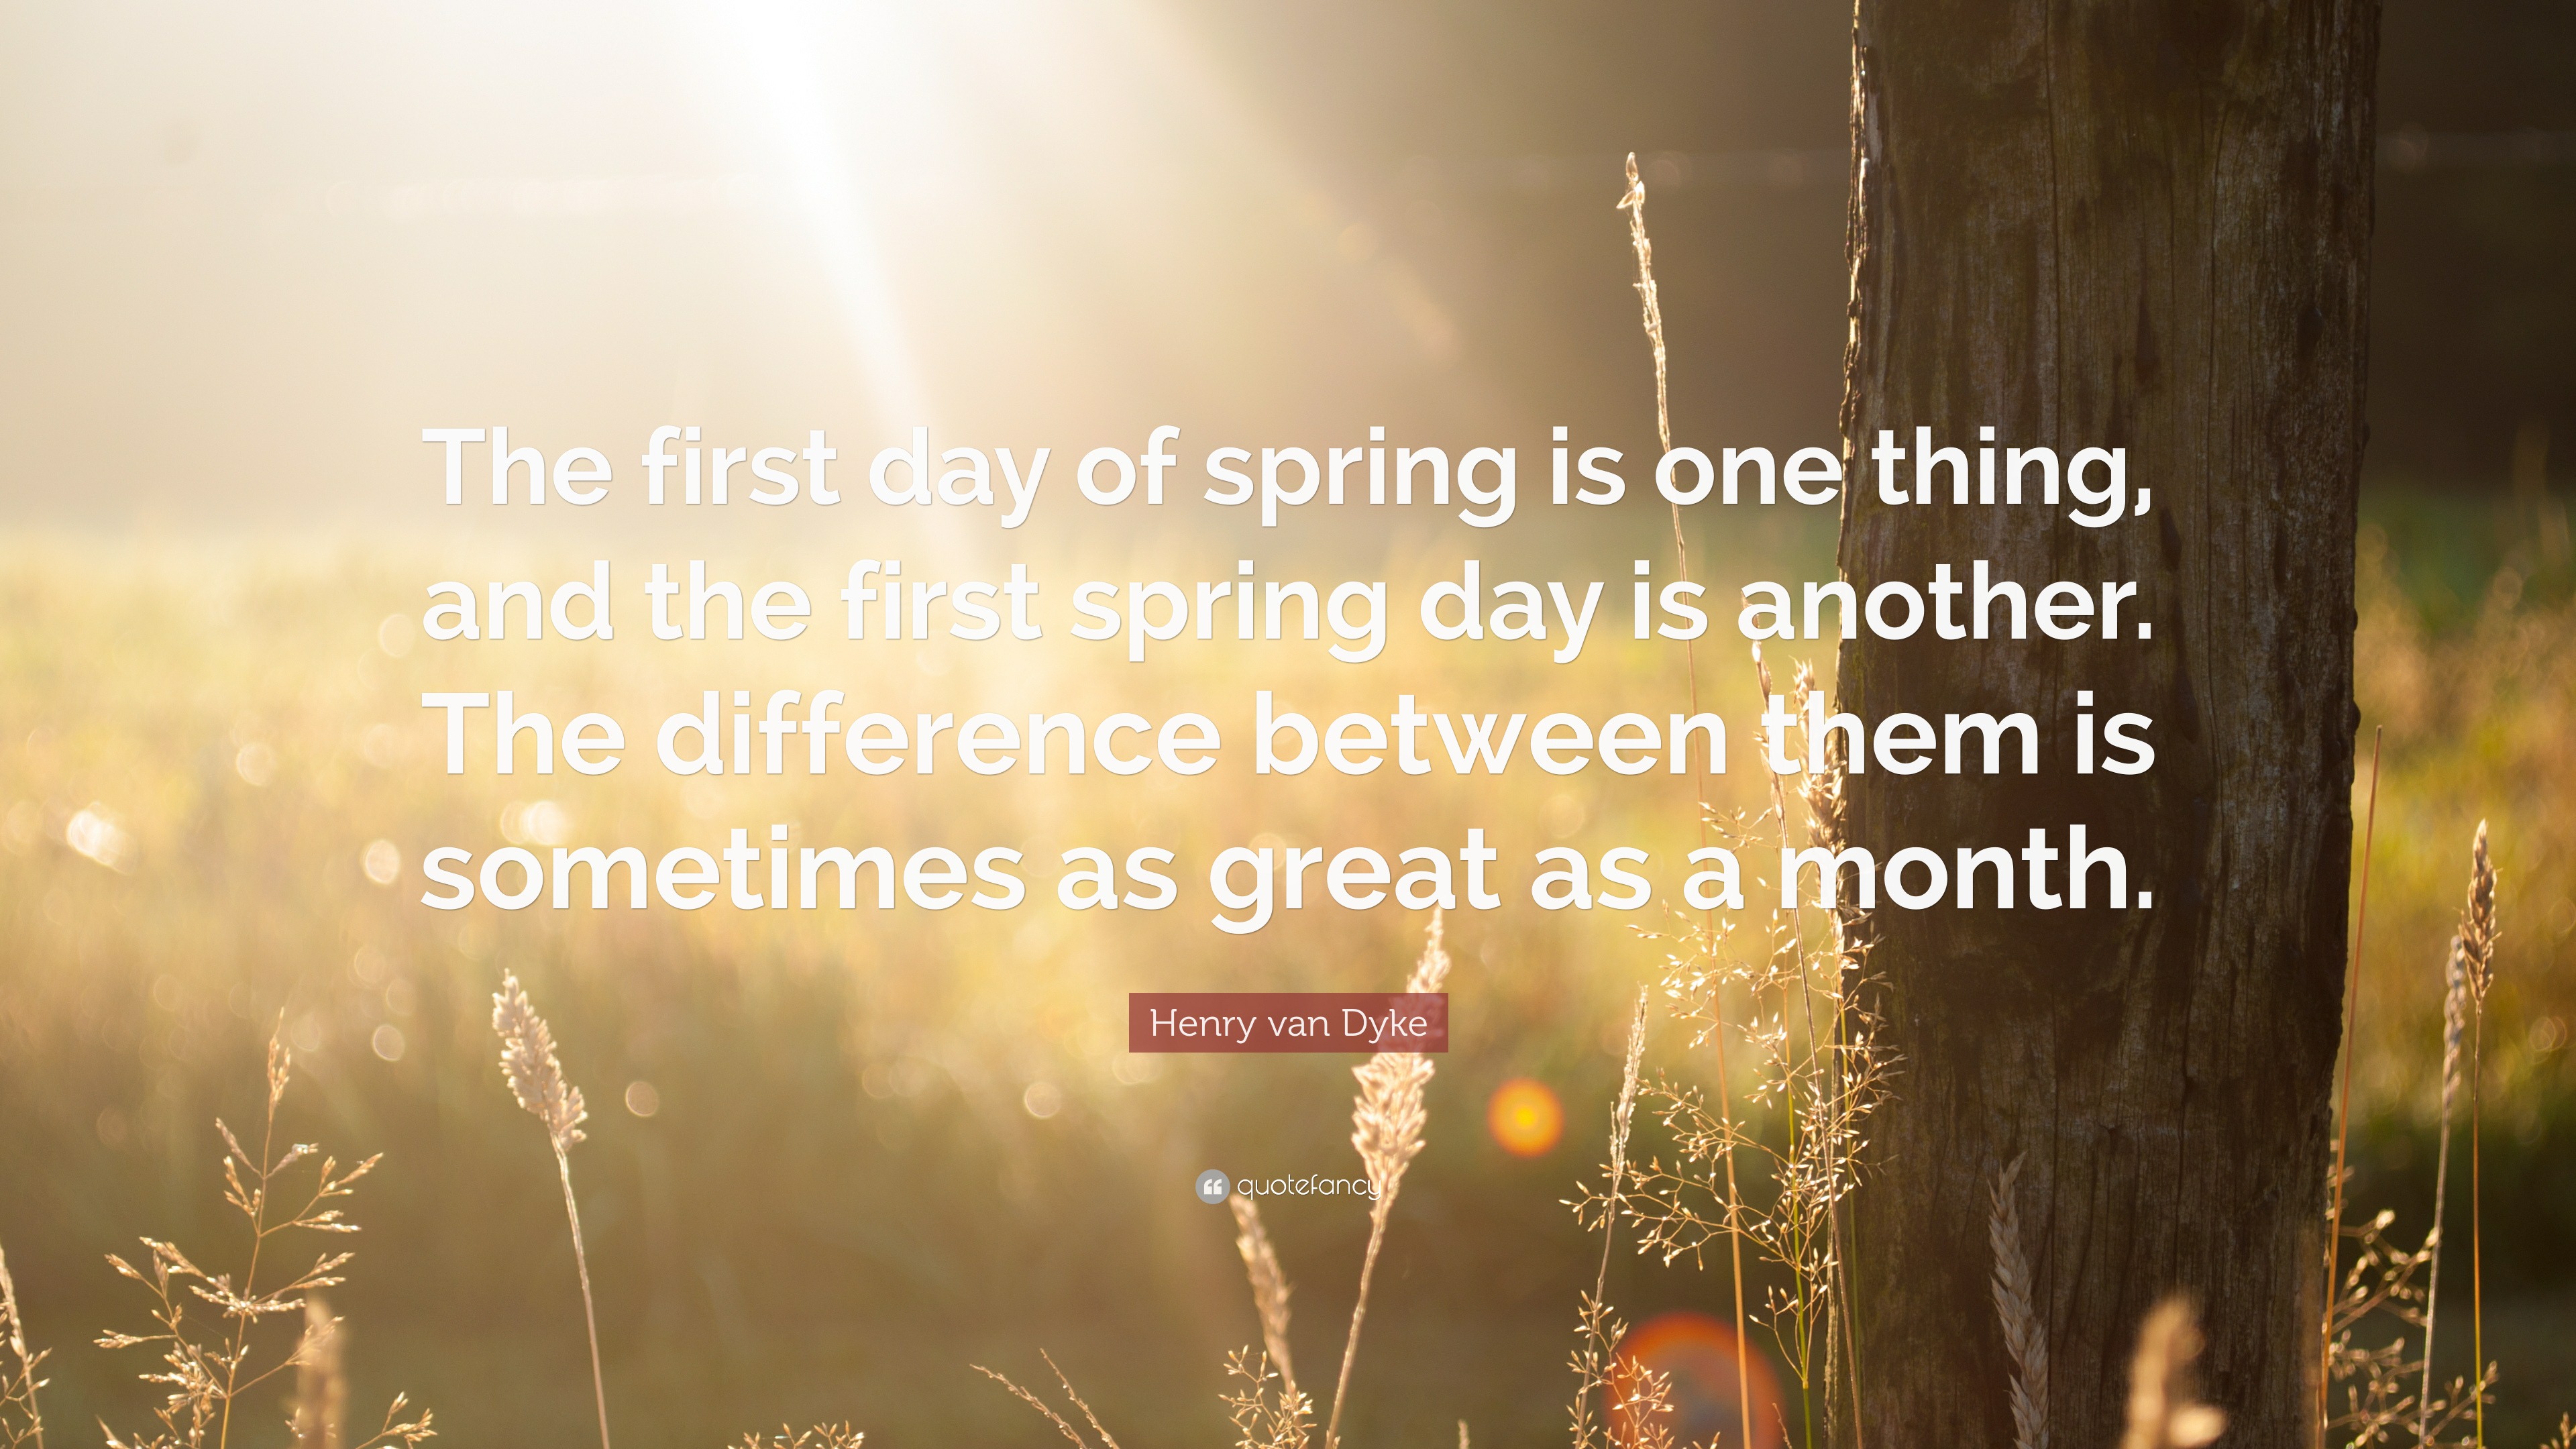 Henry van Dyke Quote “The first day of spring is one thing, and the